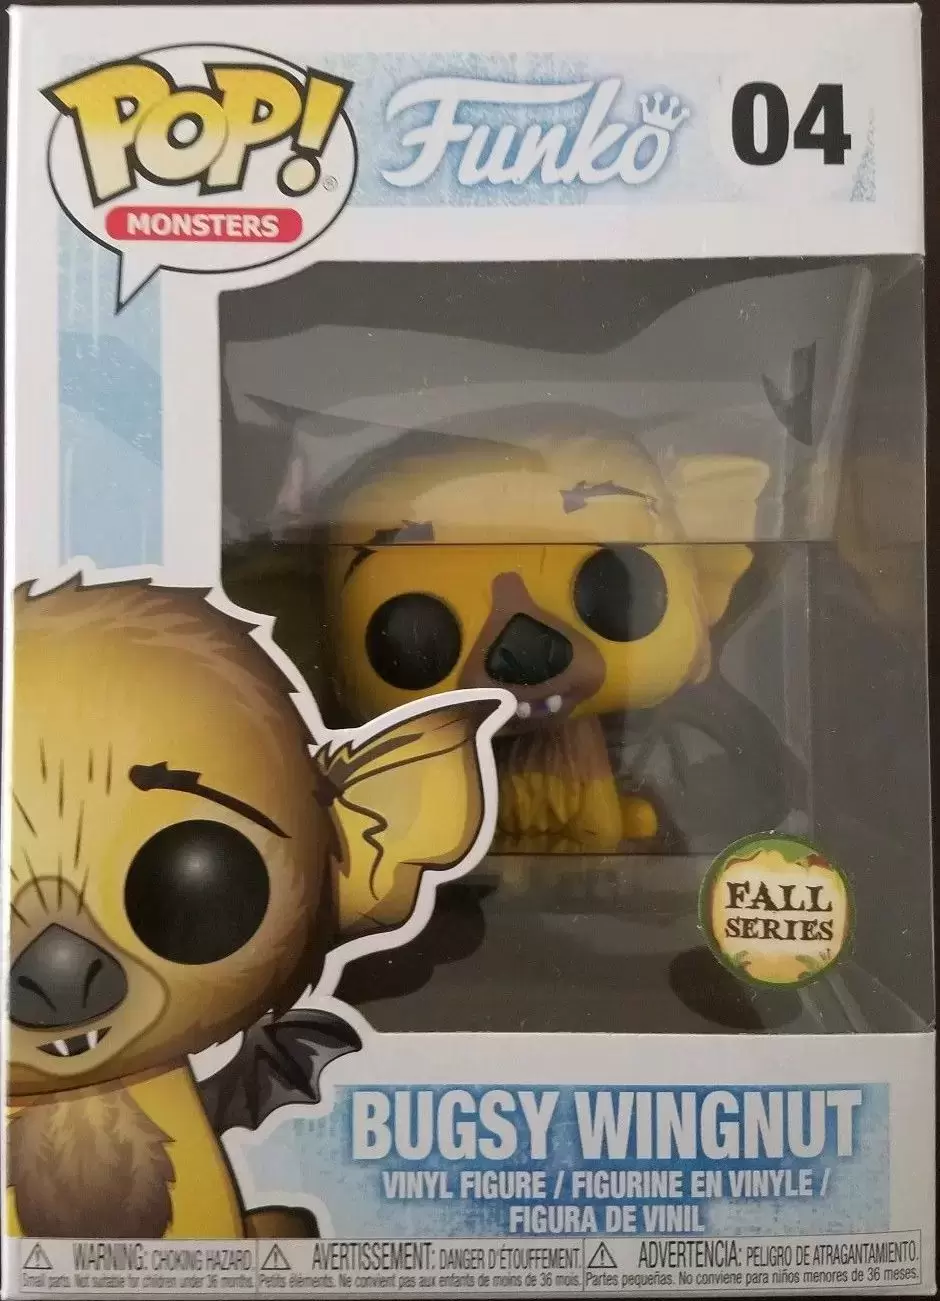 POP! Monsters - Bugsy Wingnut Fall Series